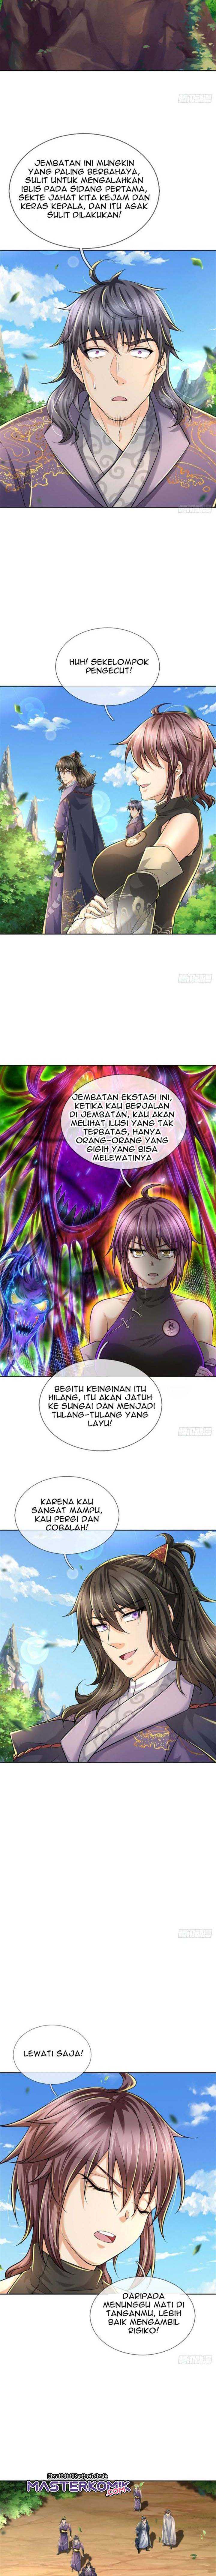 The Way Of Domination Chapter 85